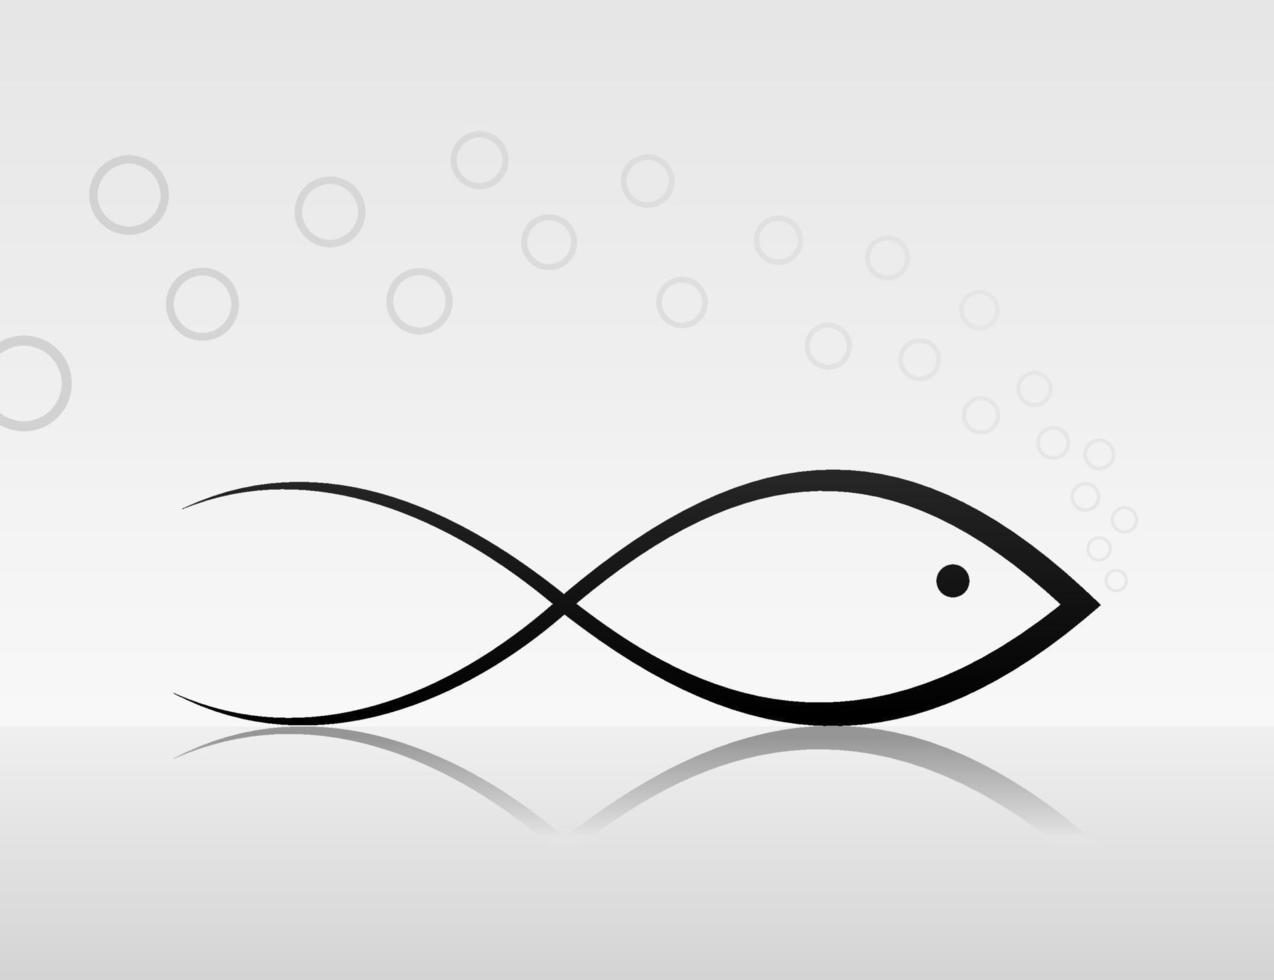 The image an icon fish. A vector illustration